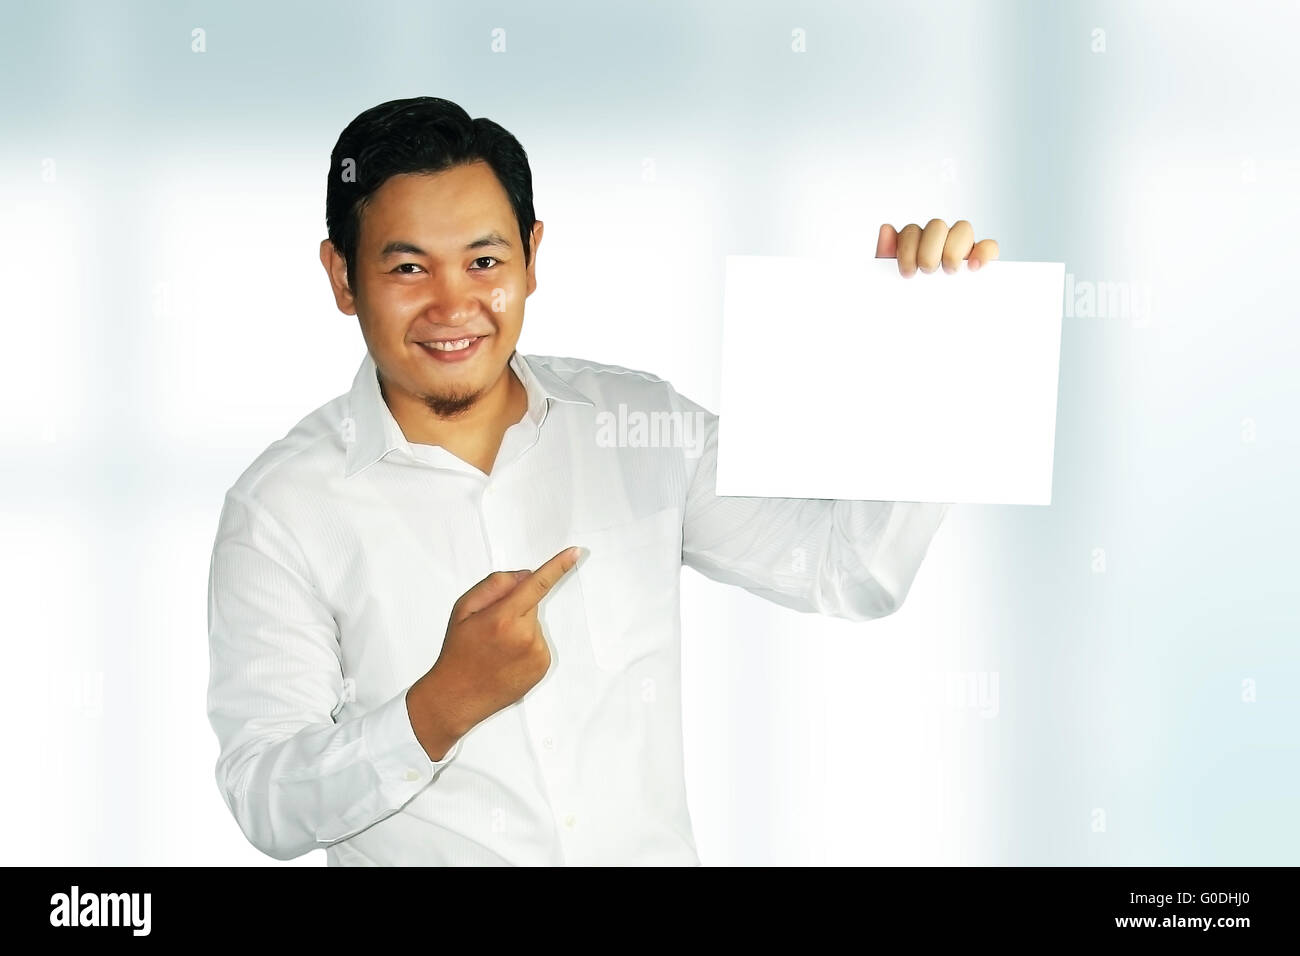 Image of a young Asian male smiling and holding white empty paper over bright background Stock Photo